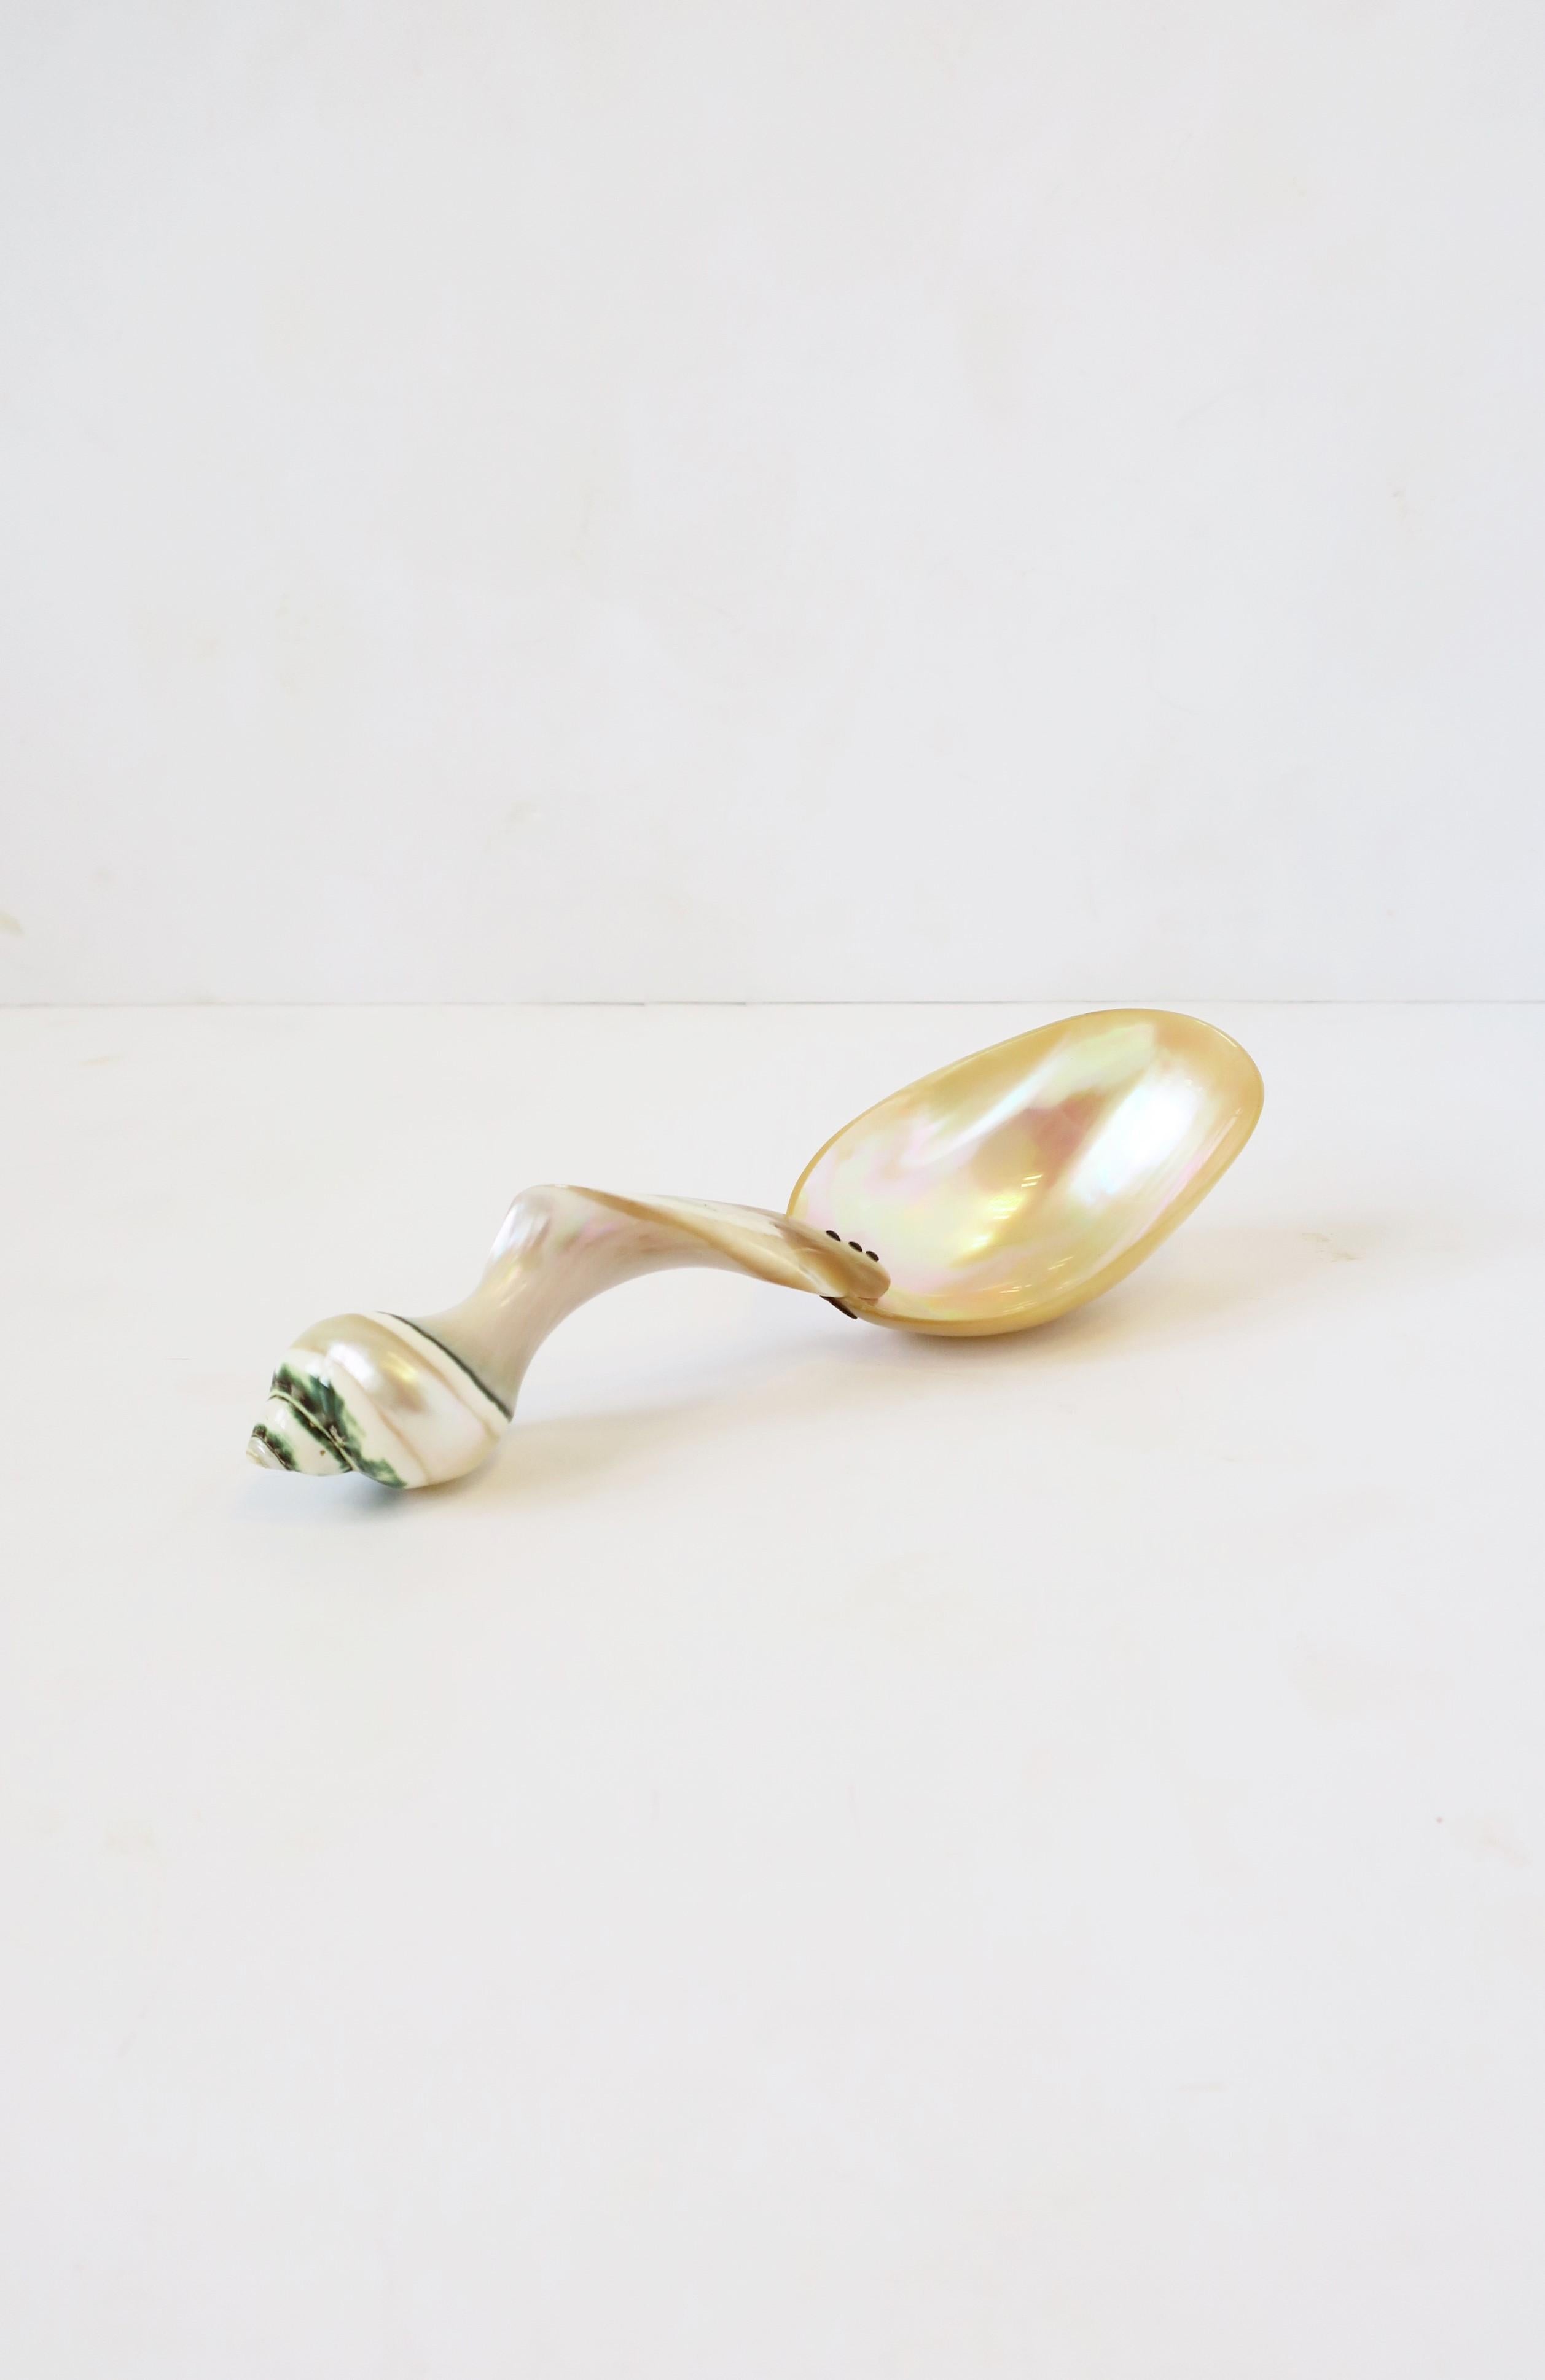 Mother of Pearl Seashell Spoon or Caviar Vessel In Good Condition For Sale In New York, NY